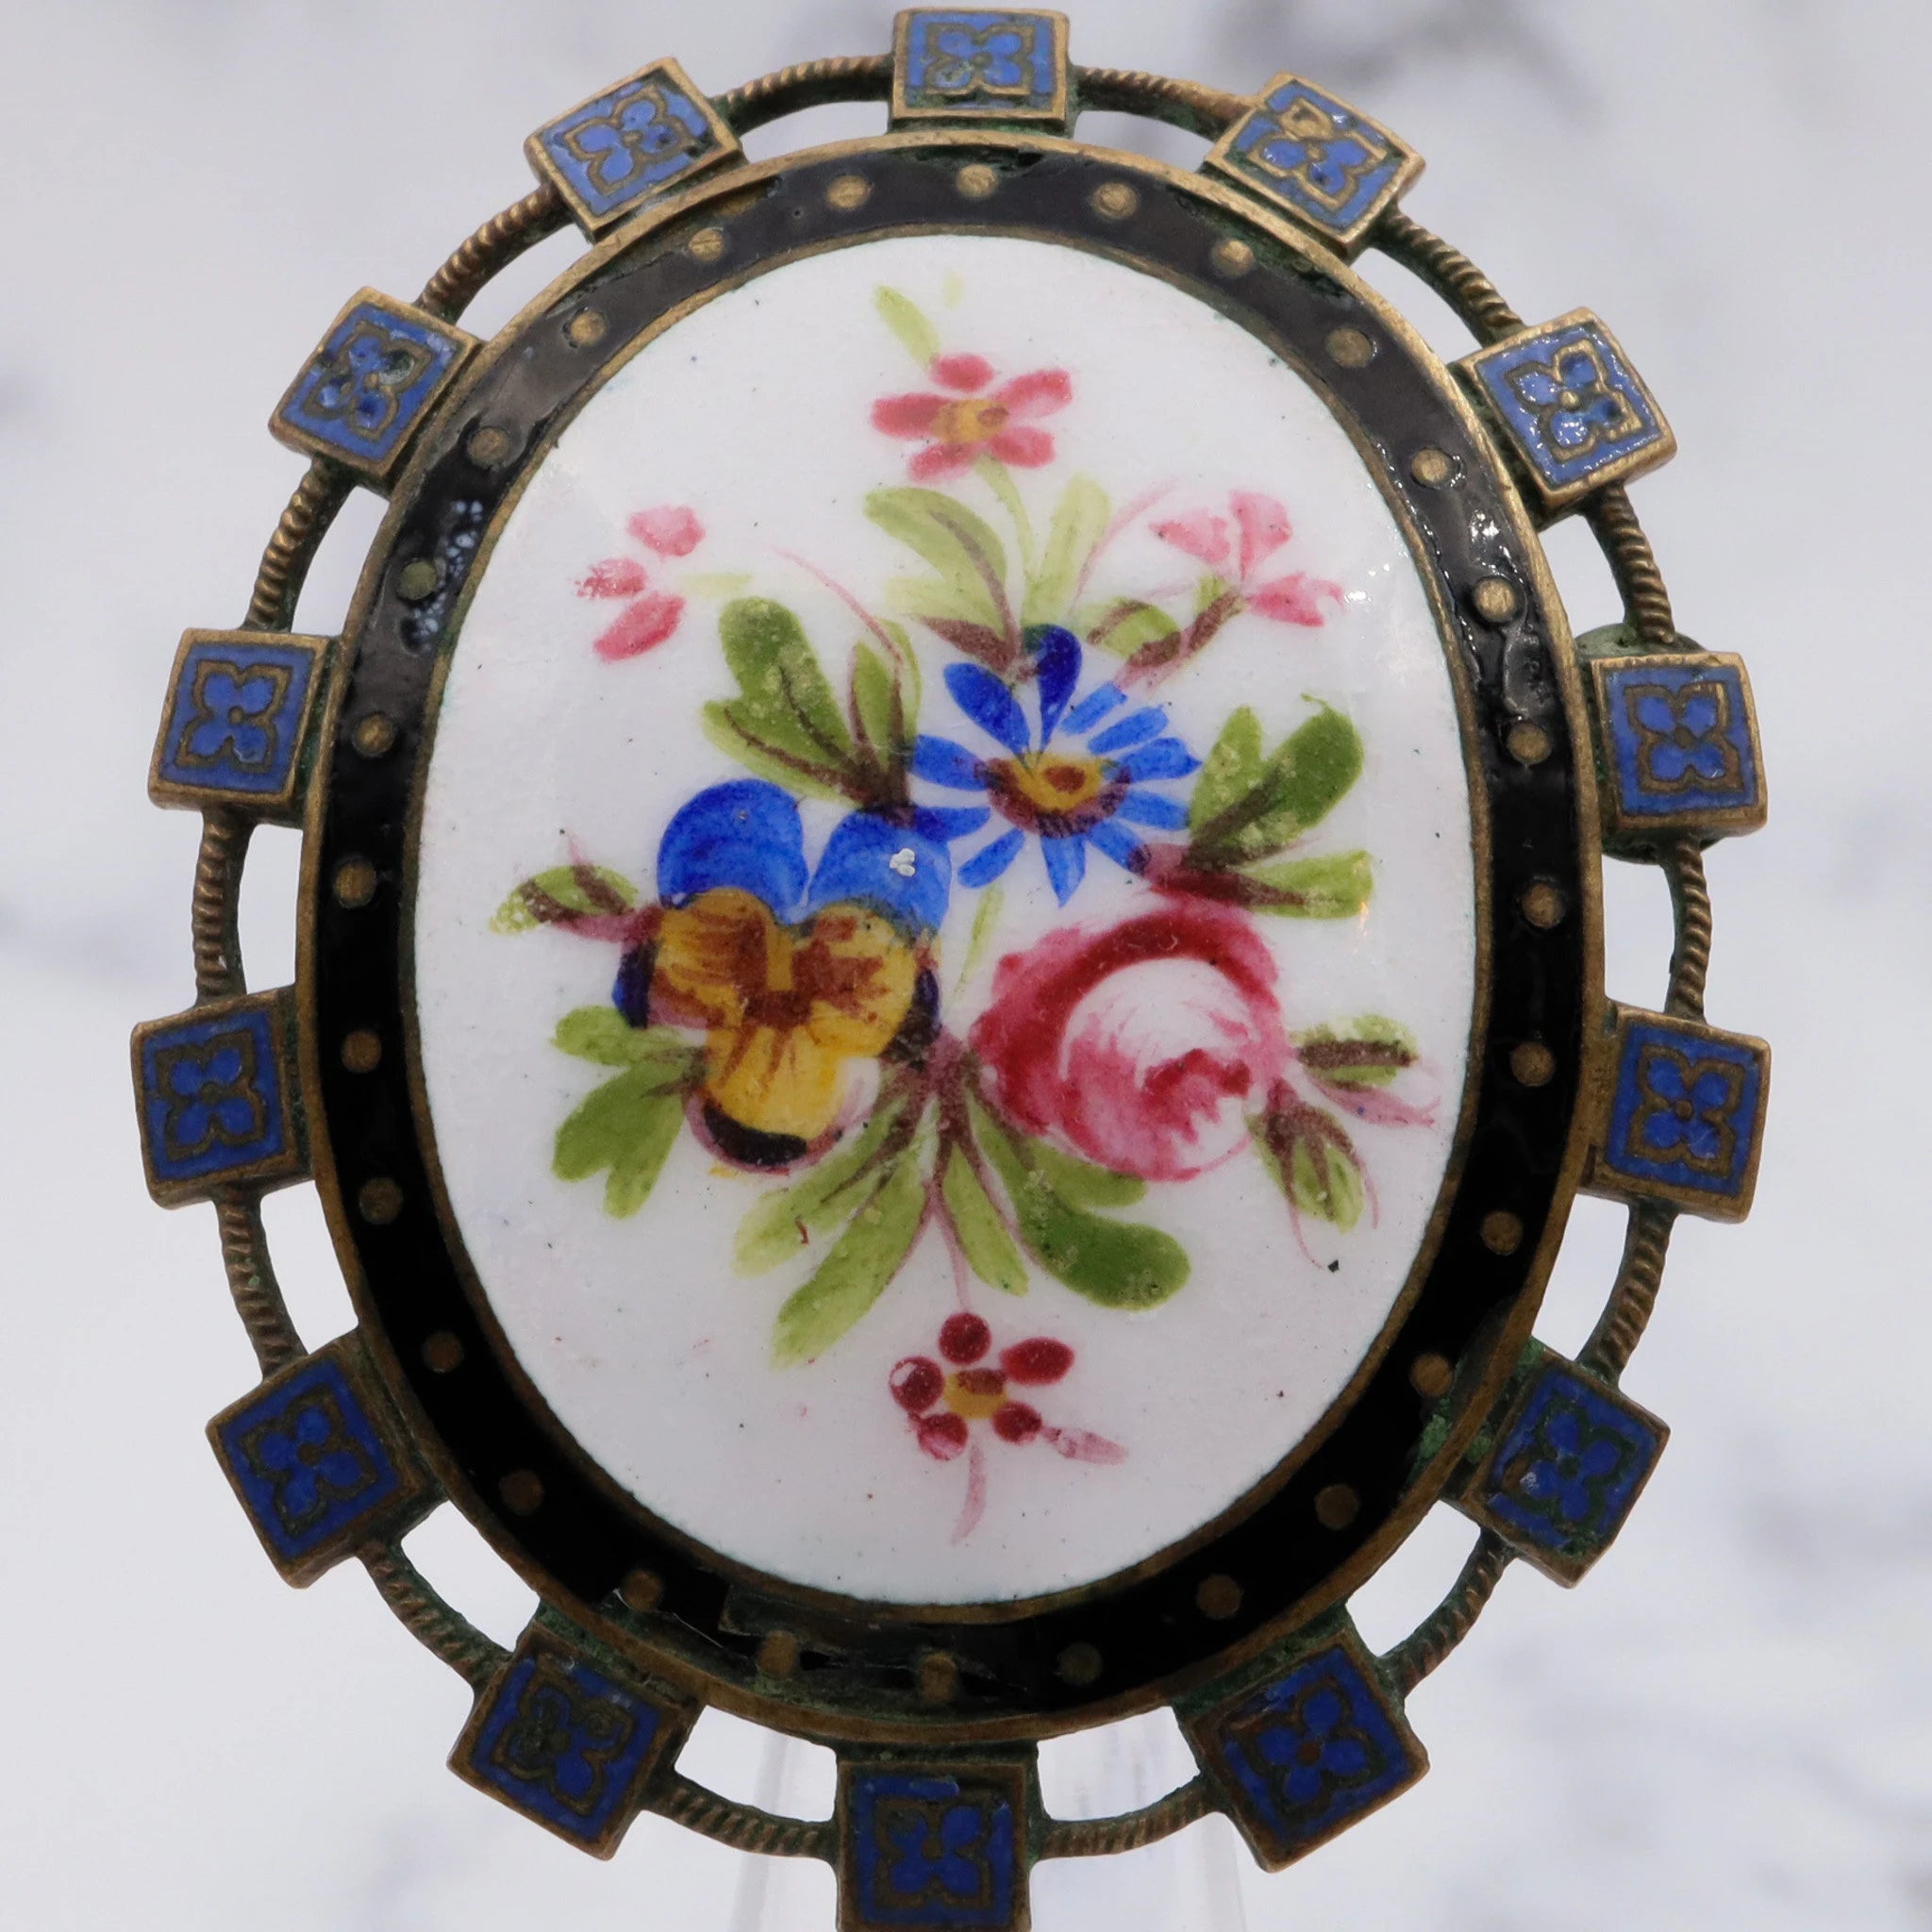 Antique Victorian hand-painted enamel and gilt metal brooch